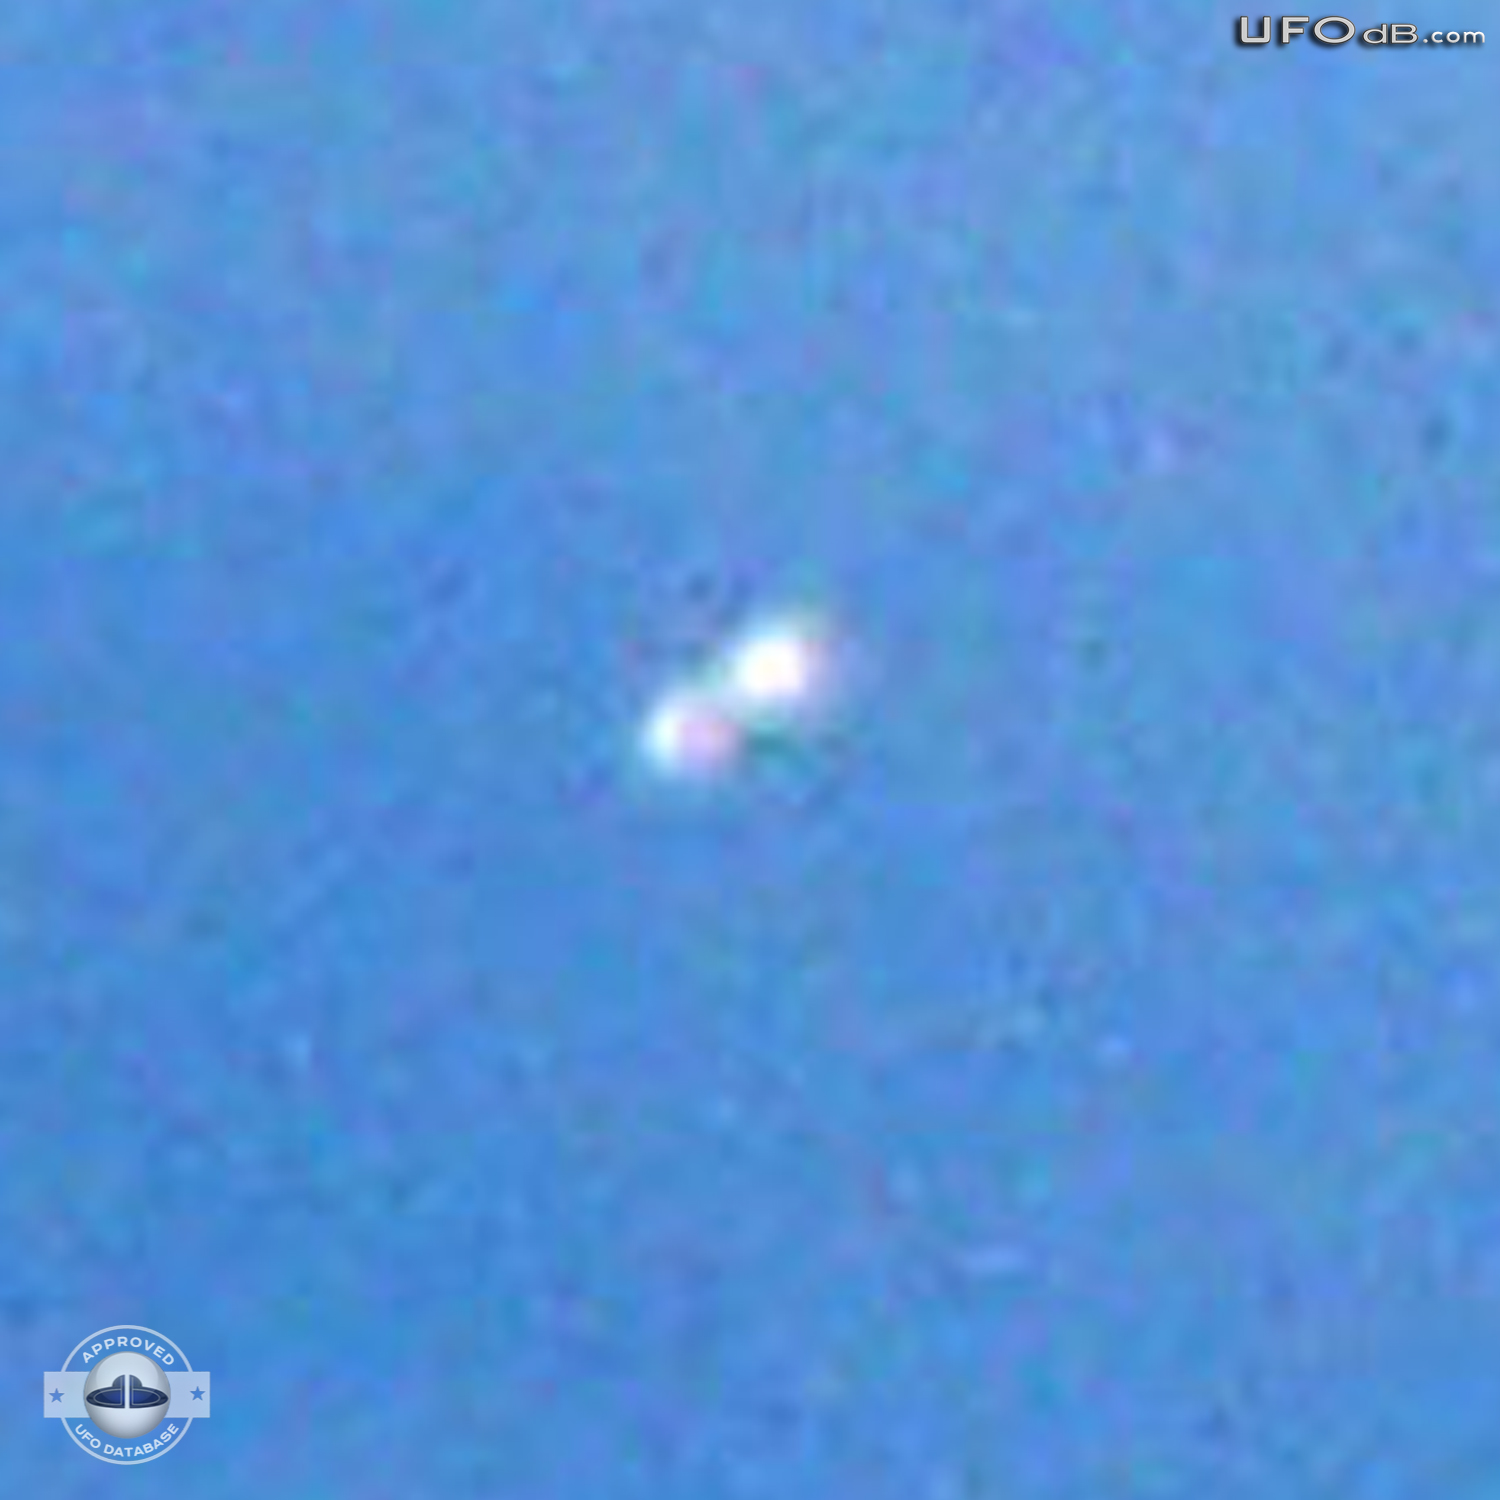 Kids run into the house after UFO sighting | Littleton USA April 2011 UFO Picture #274-3